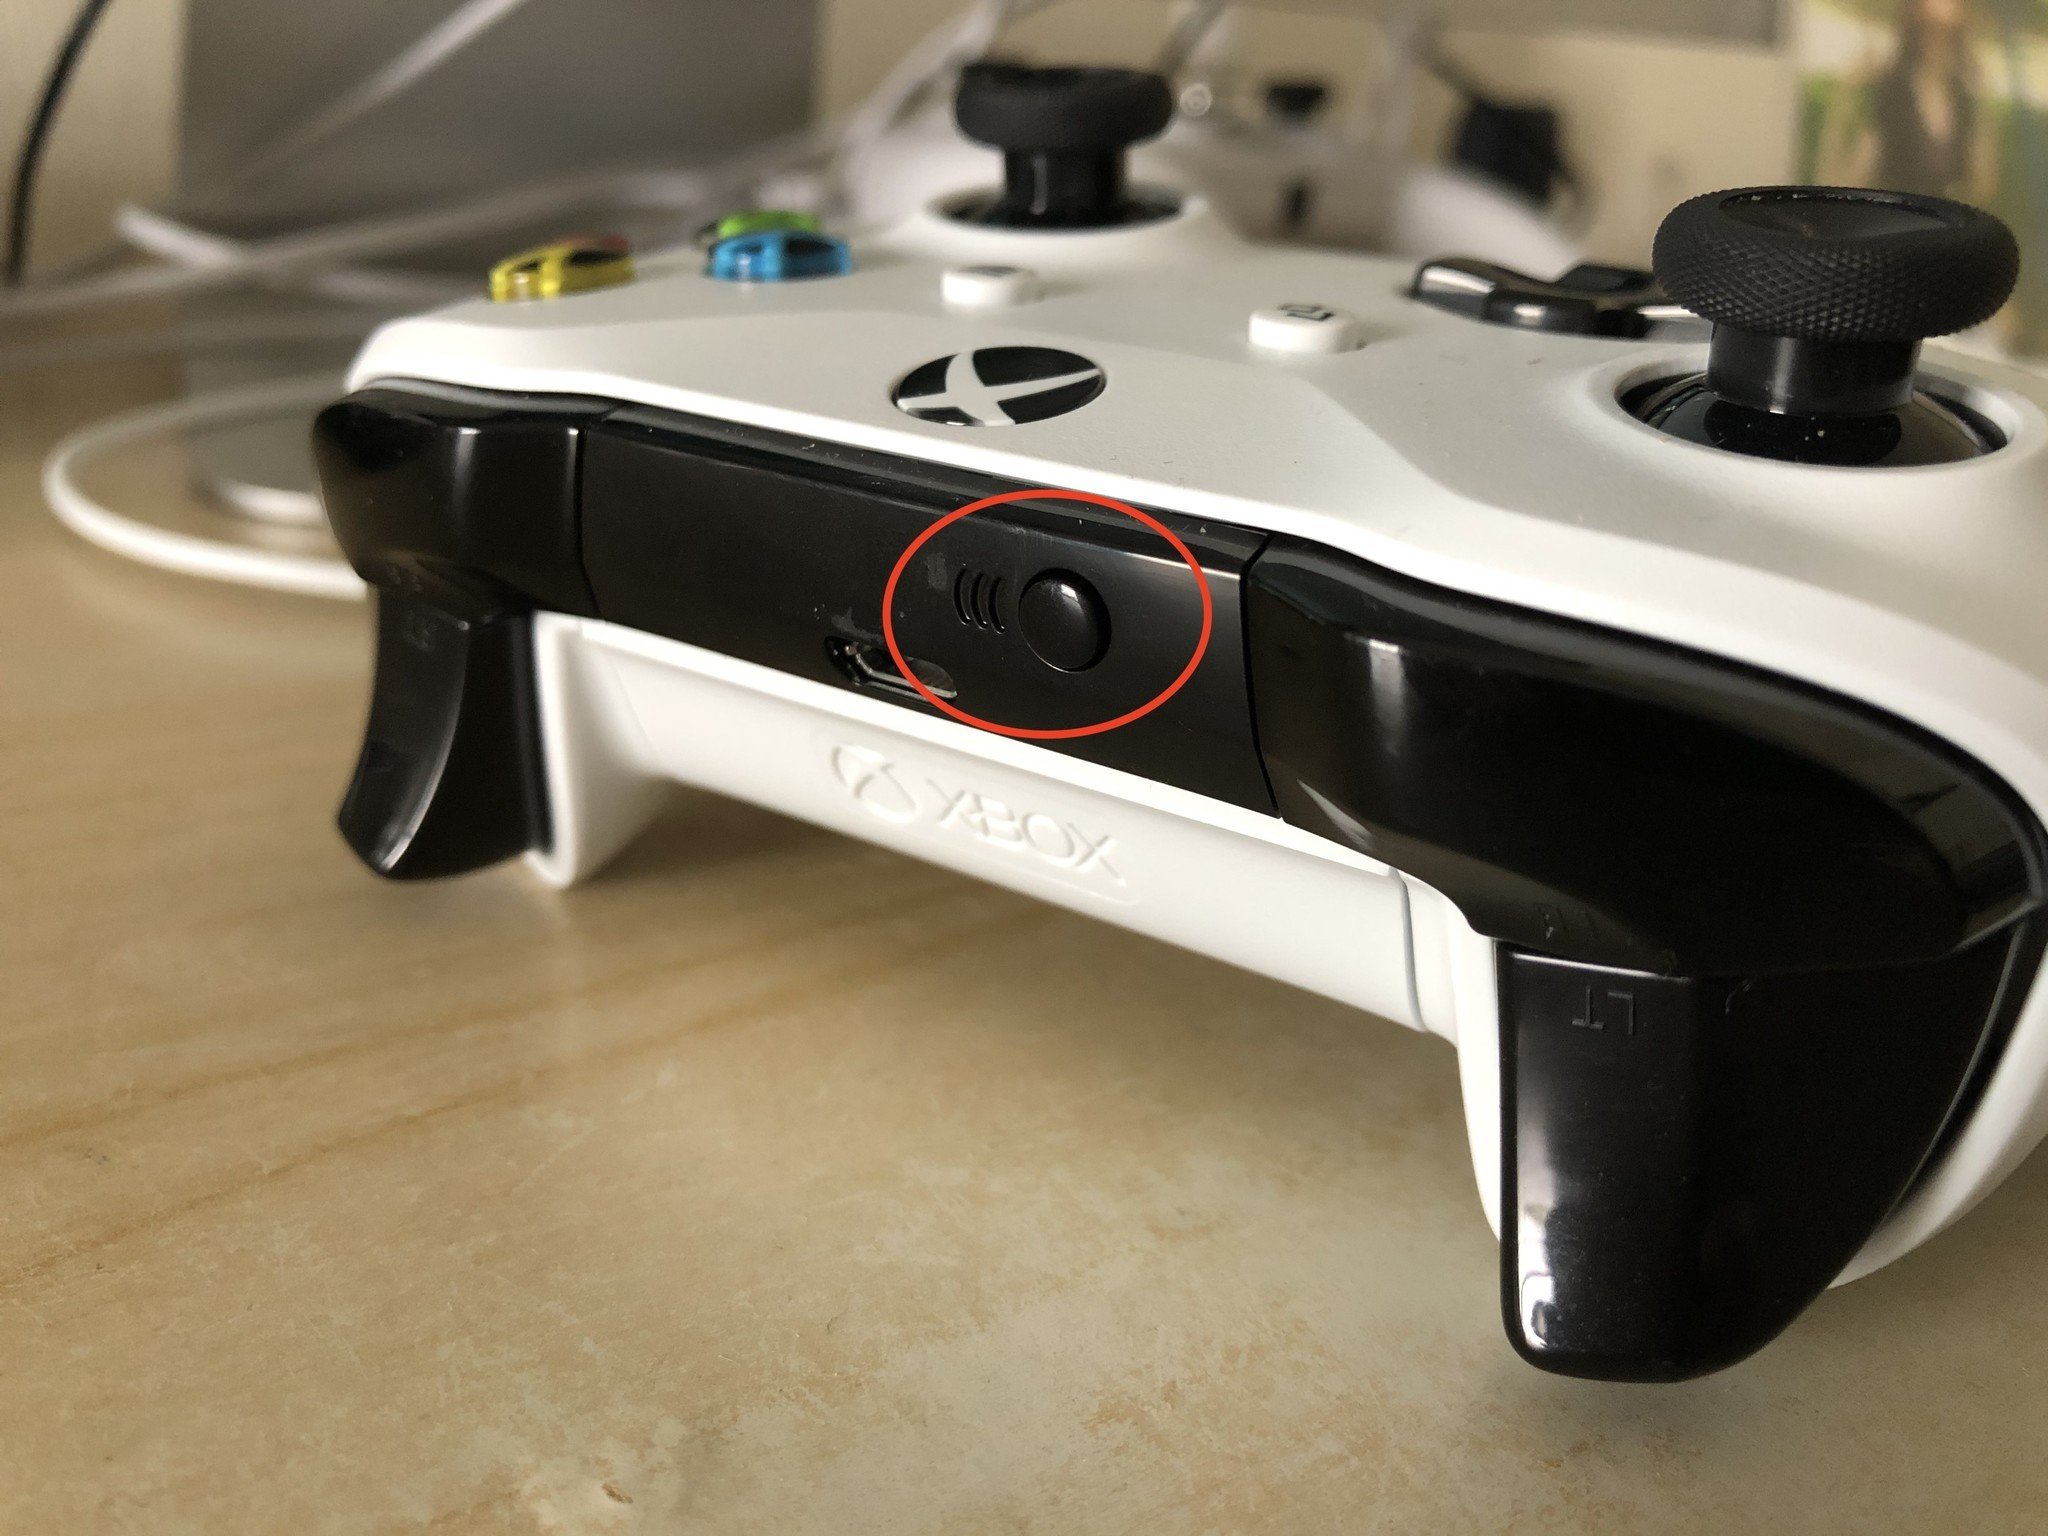 Look for the small round button on the top of the controller, near the left shoulder and trigger buttons. Press and hold it for three seconds, until the Xbox button starts blinking, to pair it with a device.